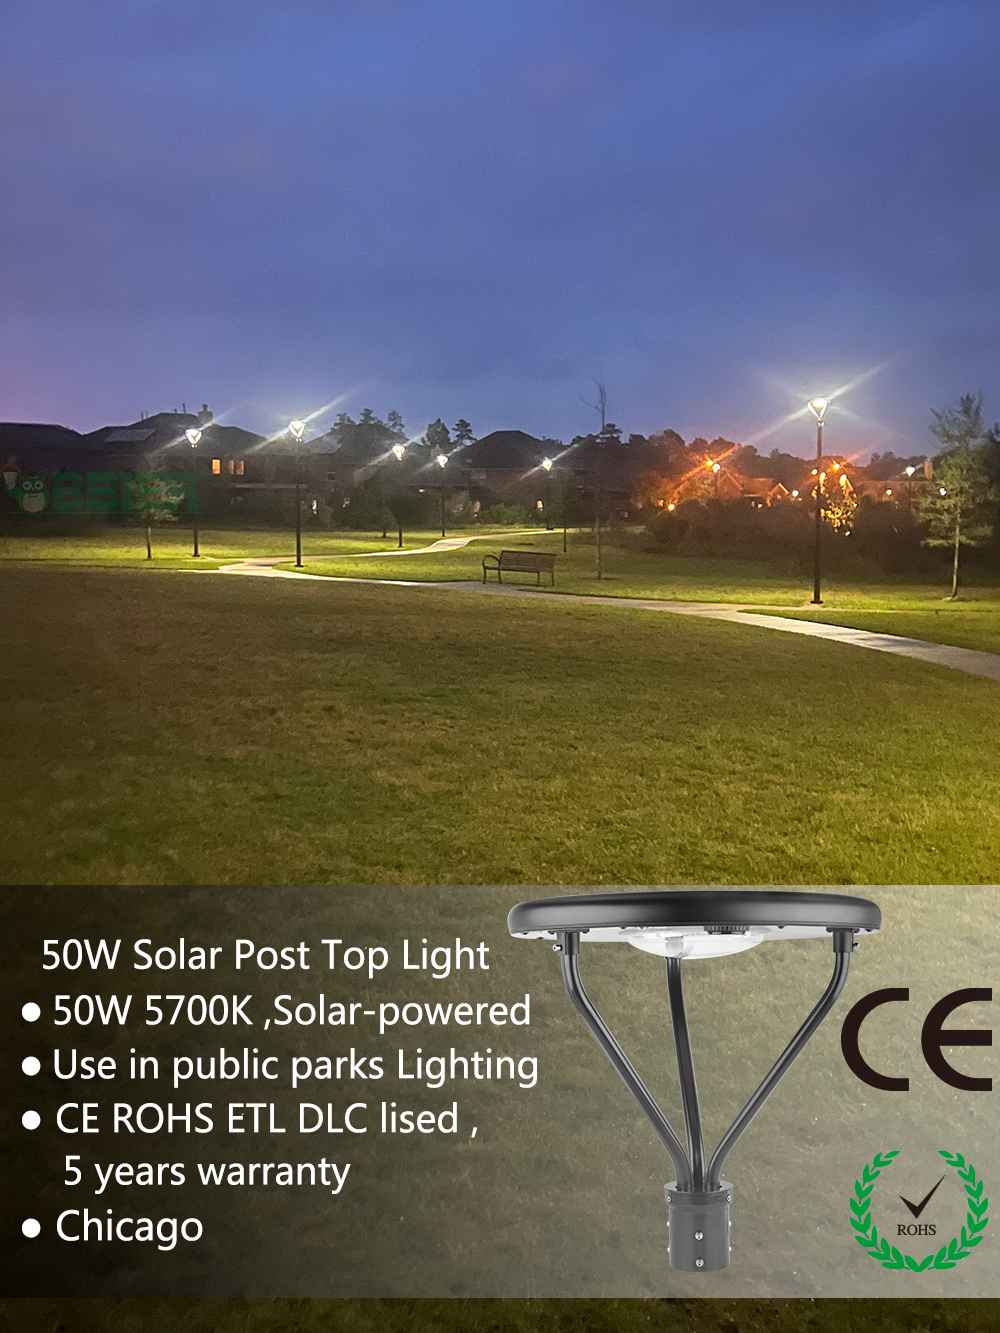 Solar Post Top Lights wholesales 50W 5700K with ETL DLC listed